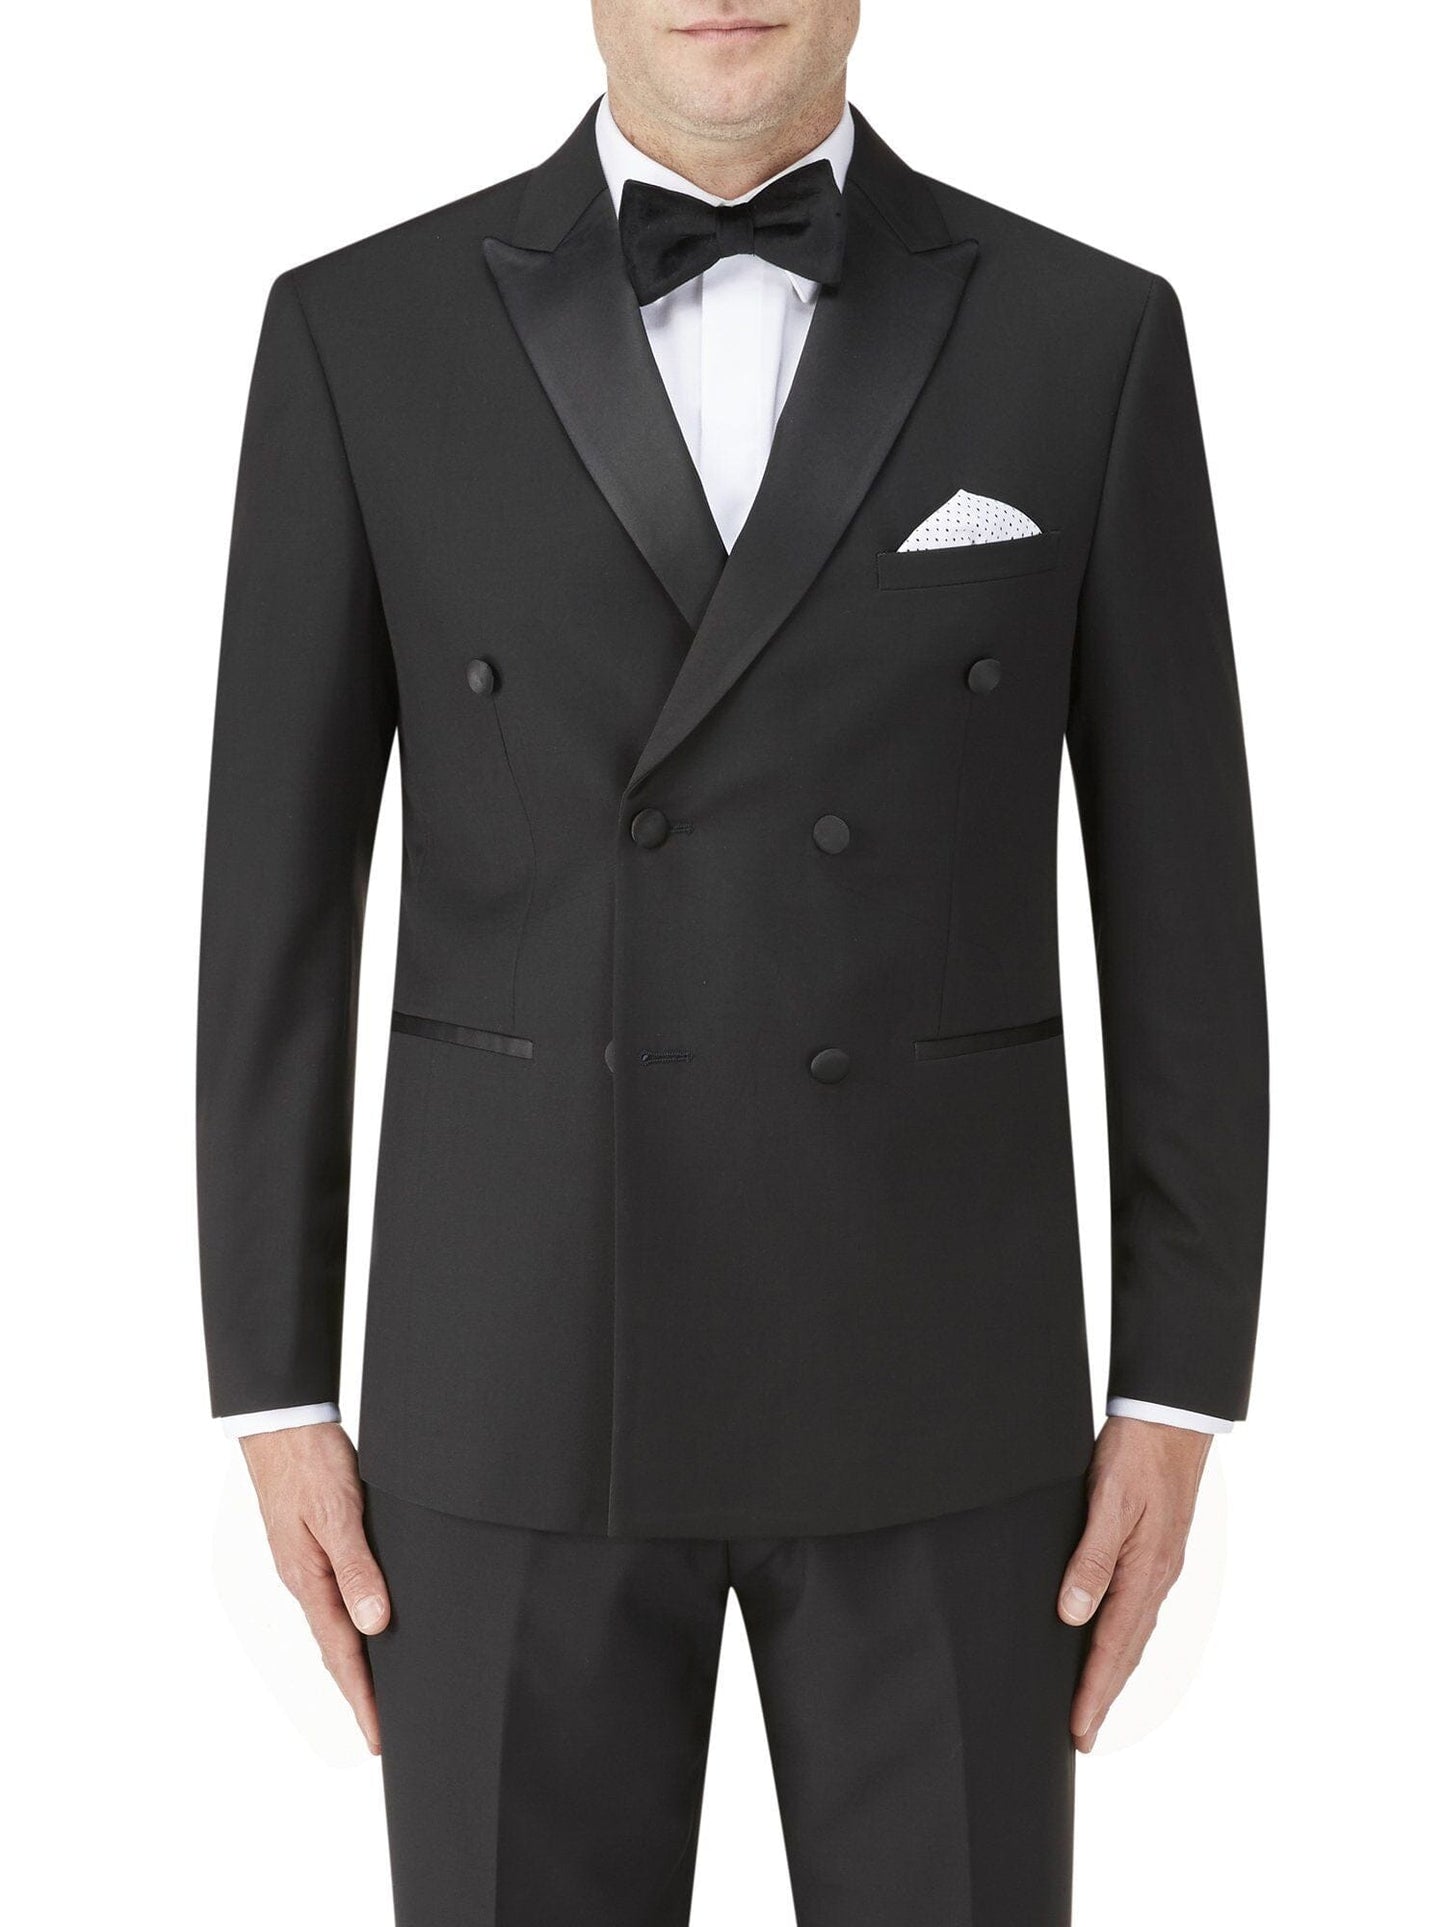 Sinatra Double Breasted Black Dinner Jacket - STOCK CLEARANCE - Blazers & Jackets Sale - 40R 